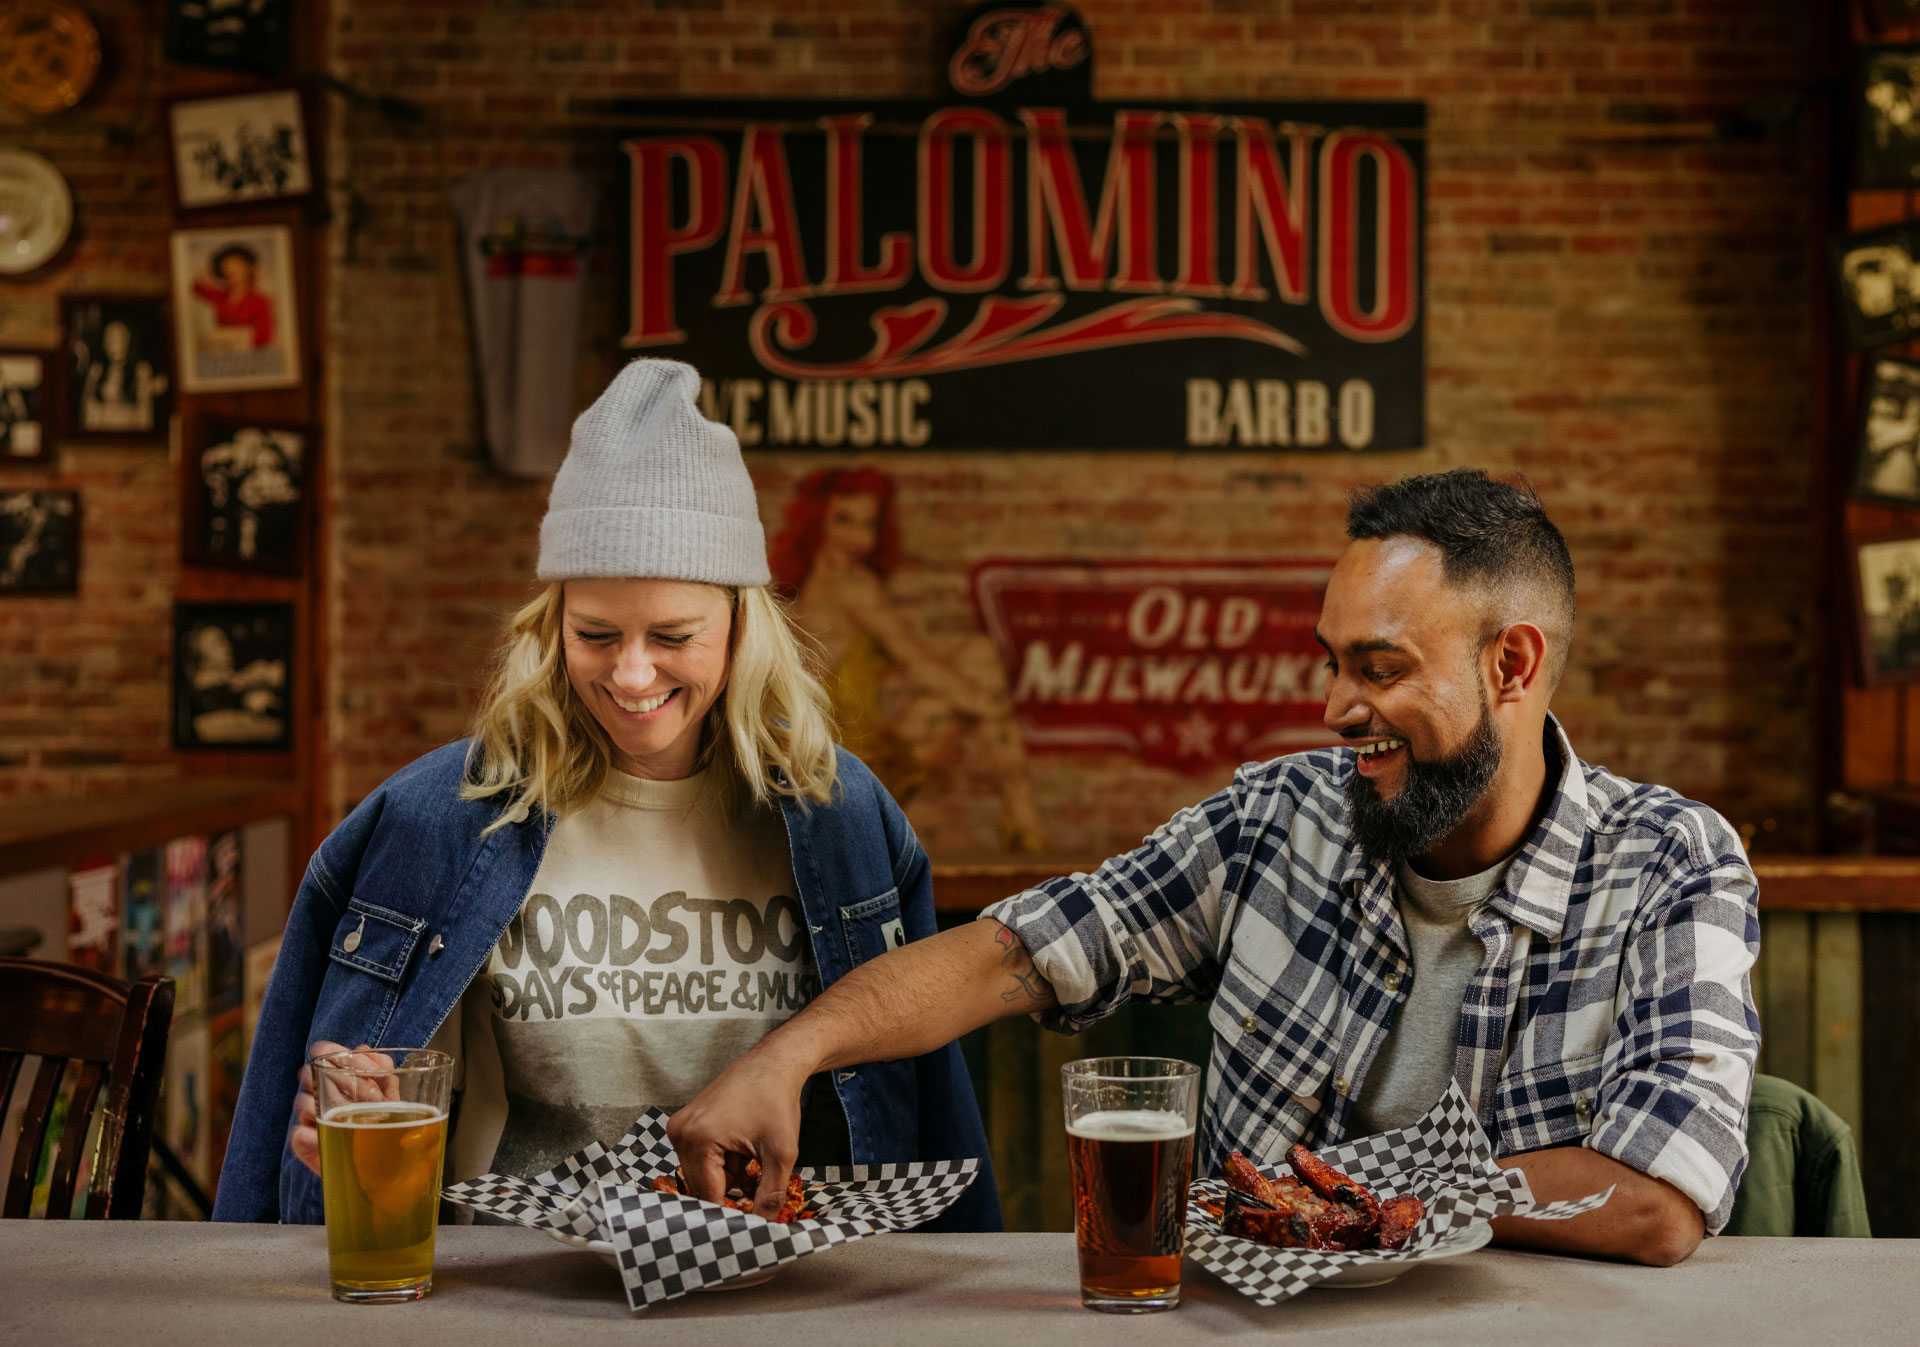 Enjoy tasty barbecue and live music at The Palomino Smokehouse.